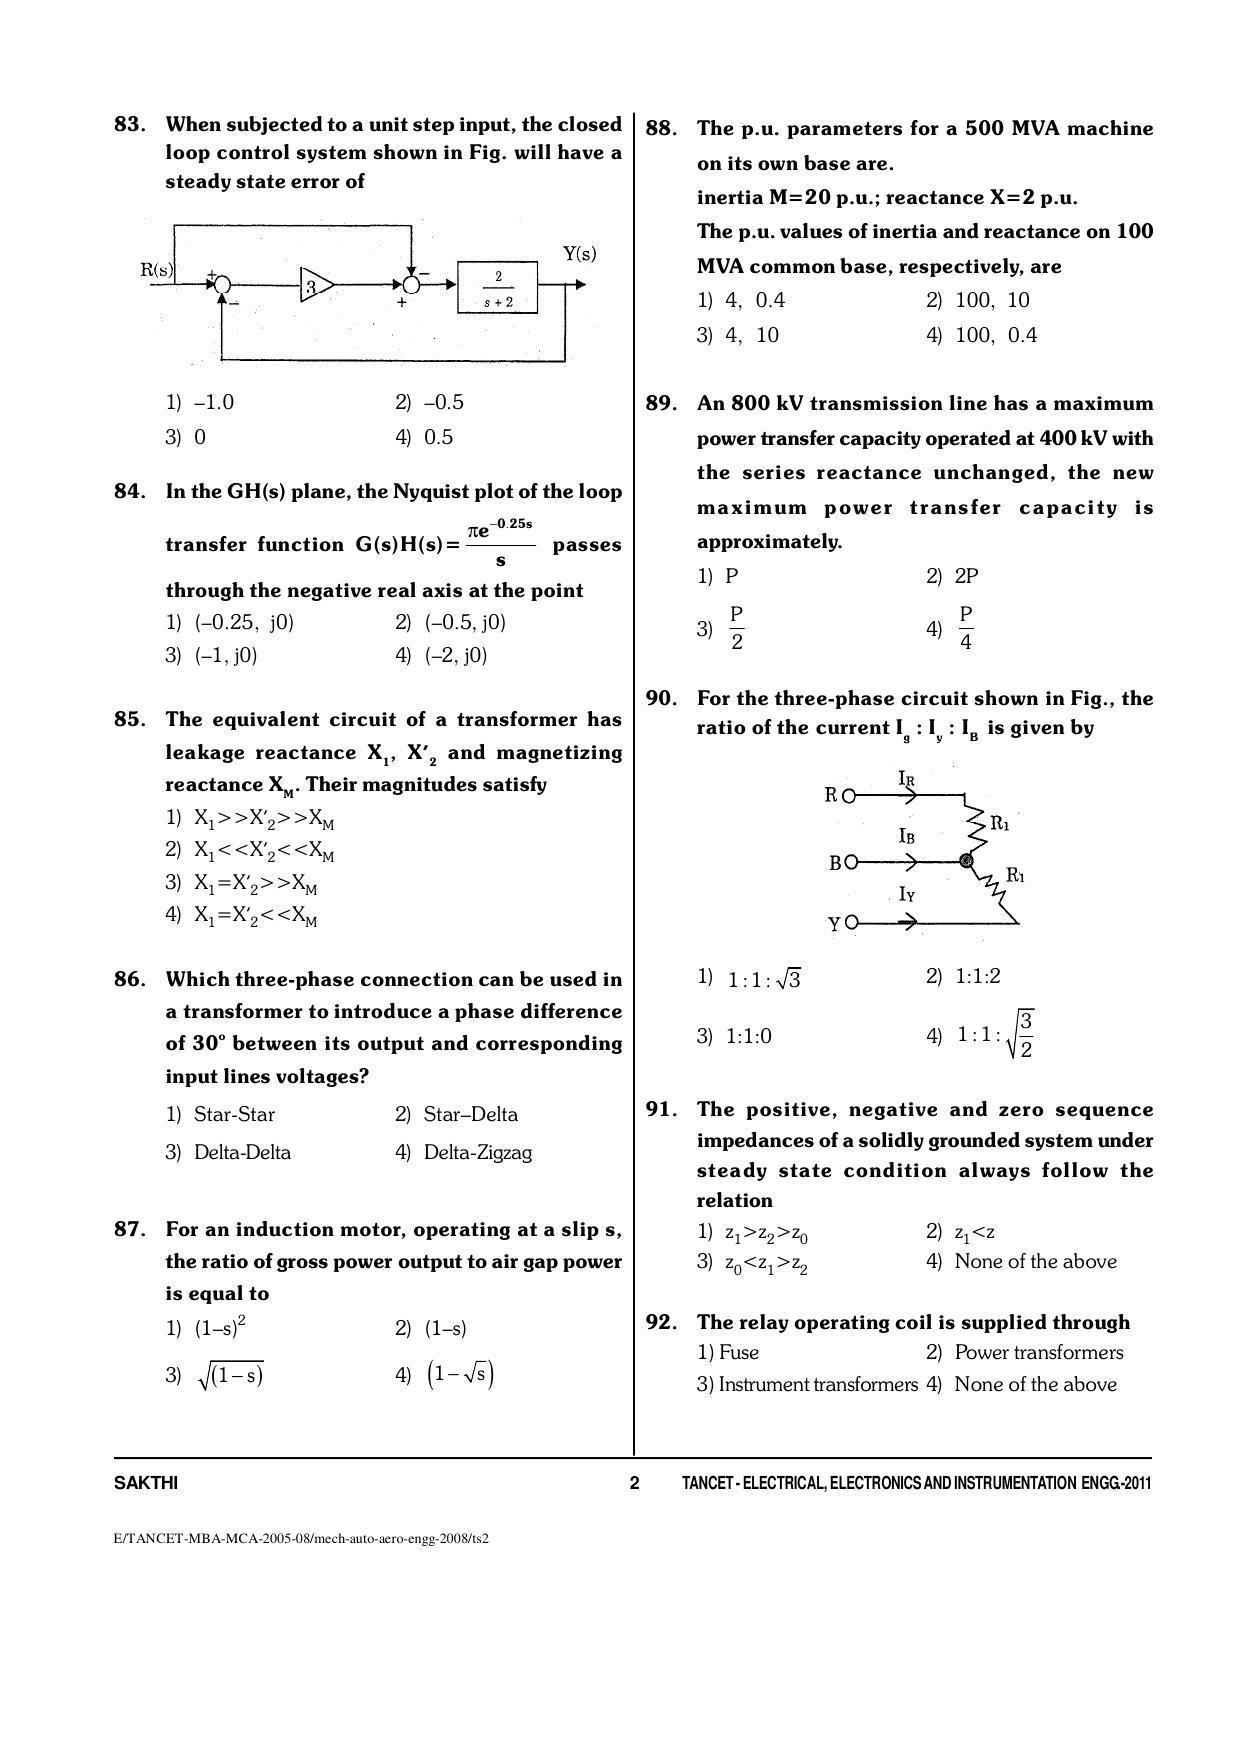 TANCET Electrical, Electronics and Instrumentation Engineering Question Papers 2011 - Page 2